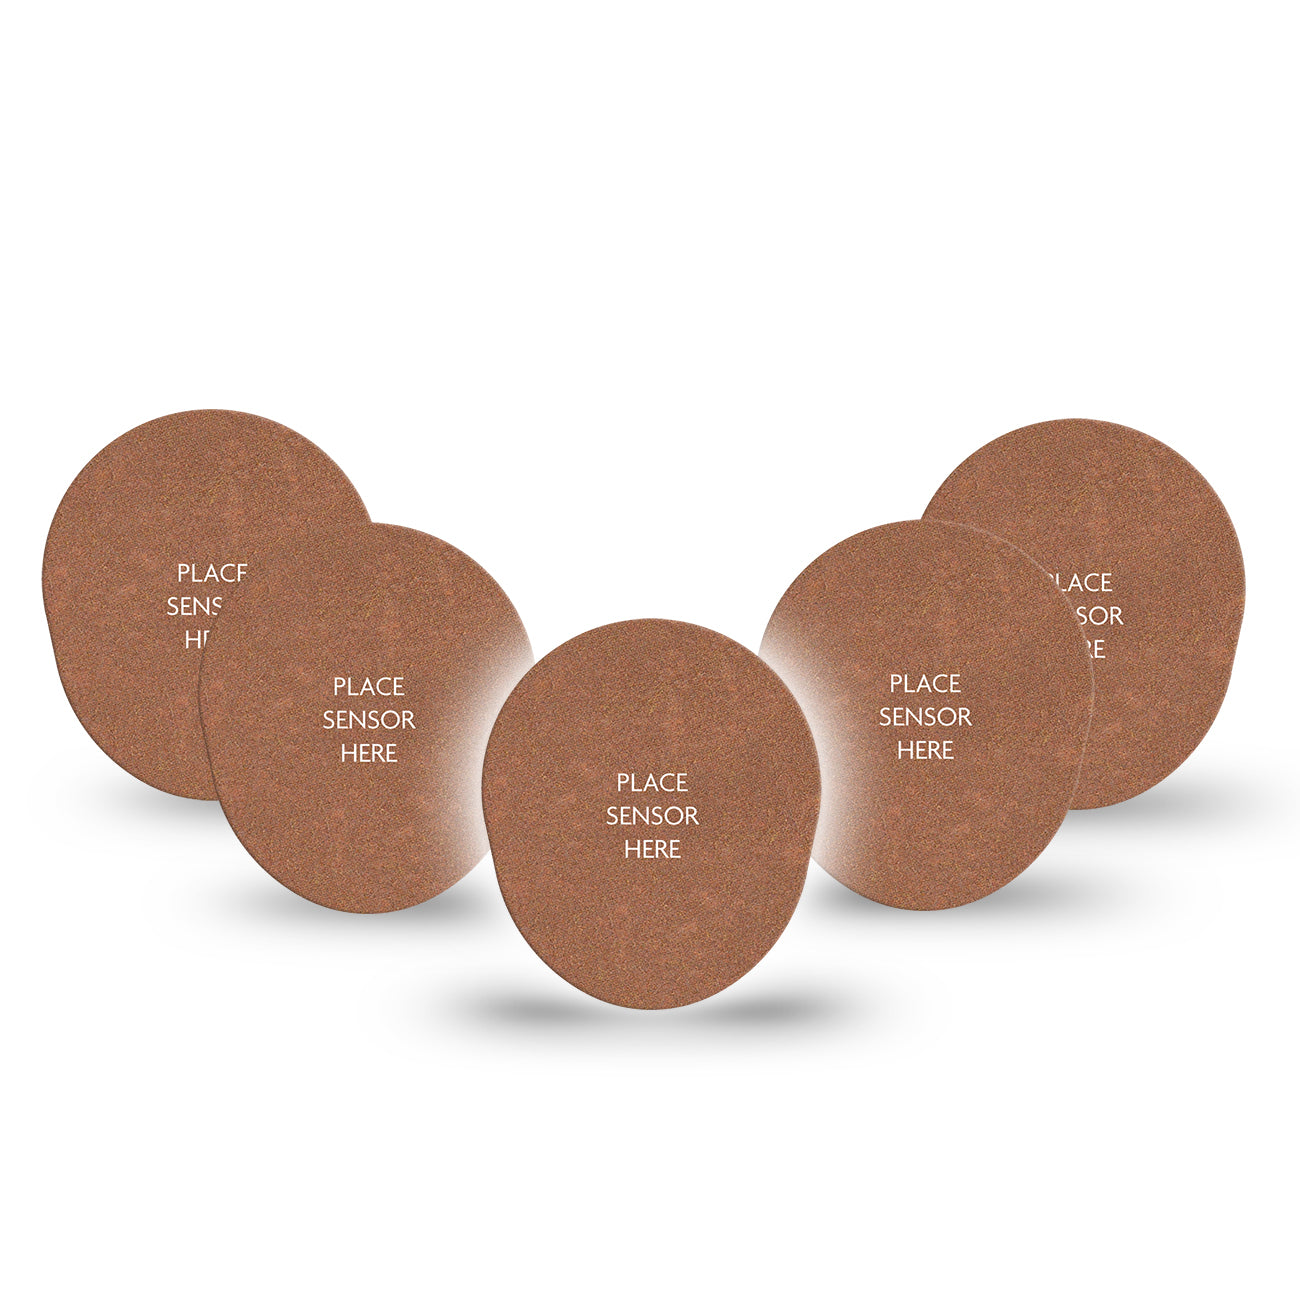 Skin Tone 03 - Caramel Dexcom G7 Underpatch Tape, 5-Pack, Deep Tan Brown Skin Tone Inspired CGM Underpatch Underlay Patch